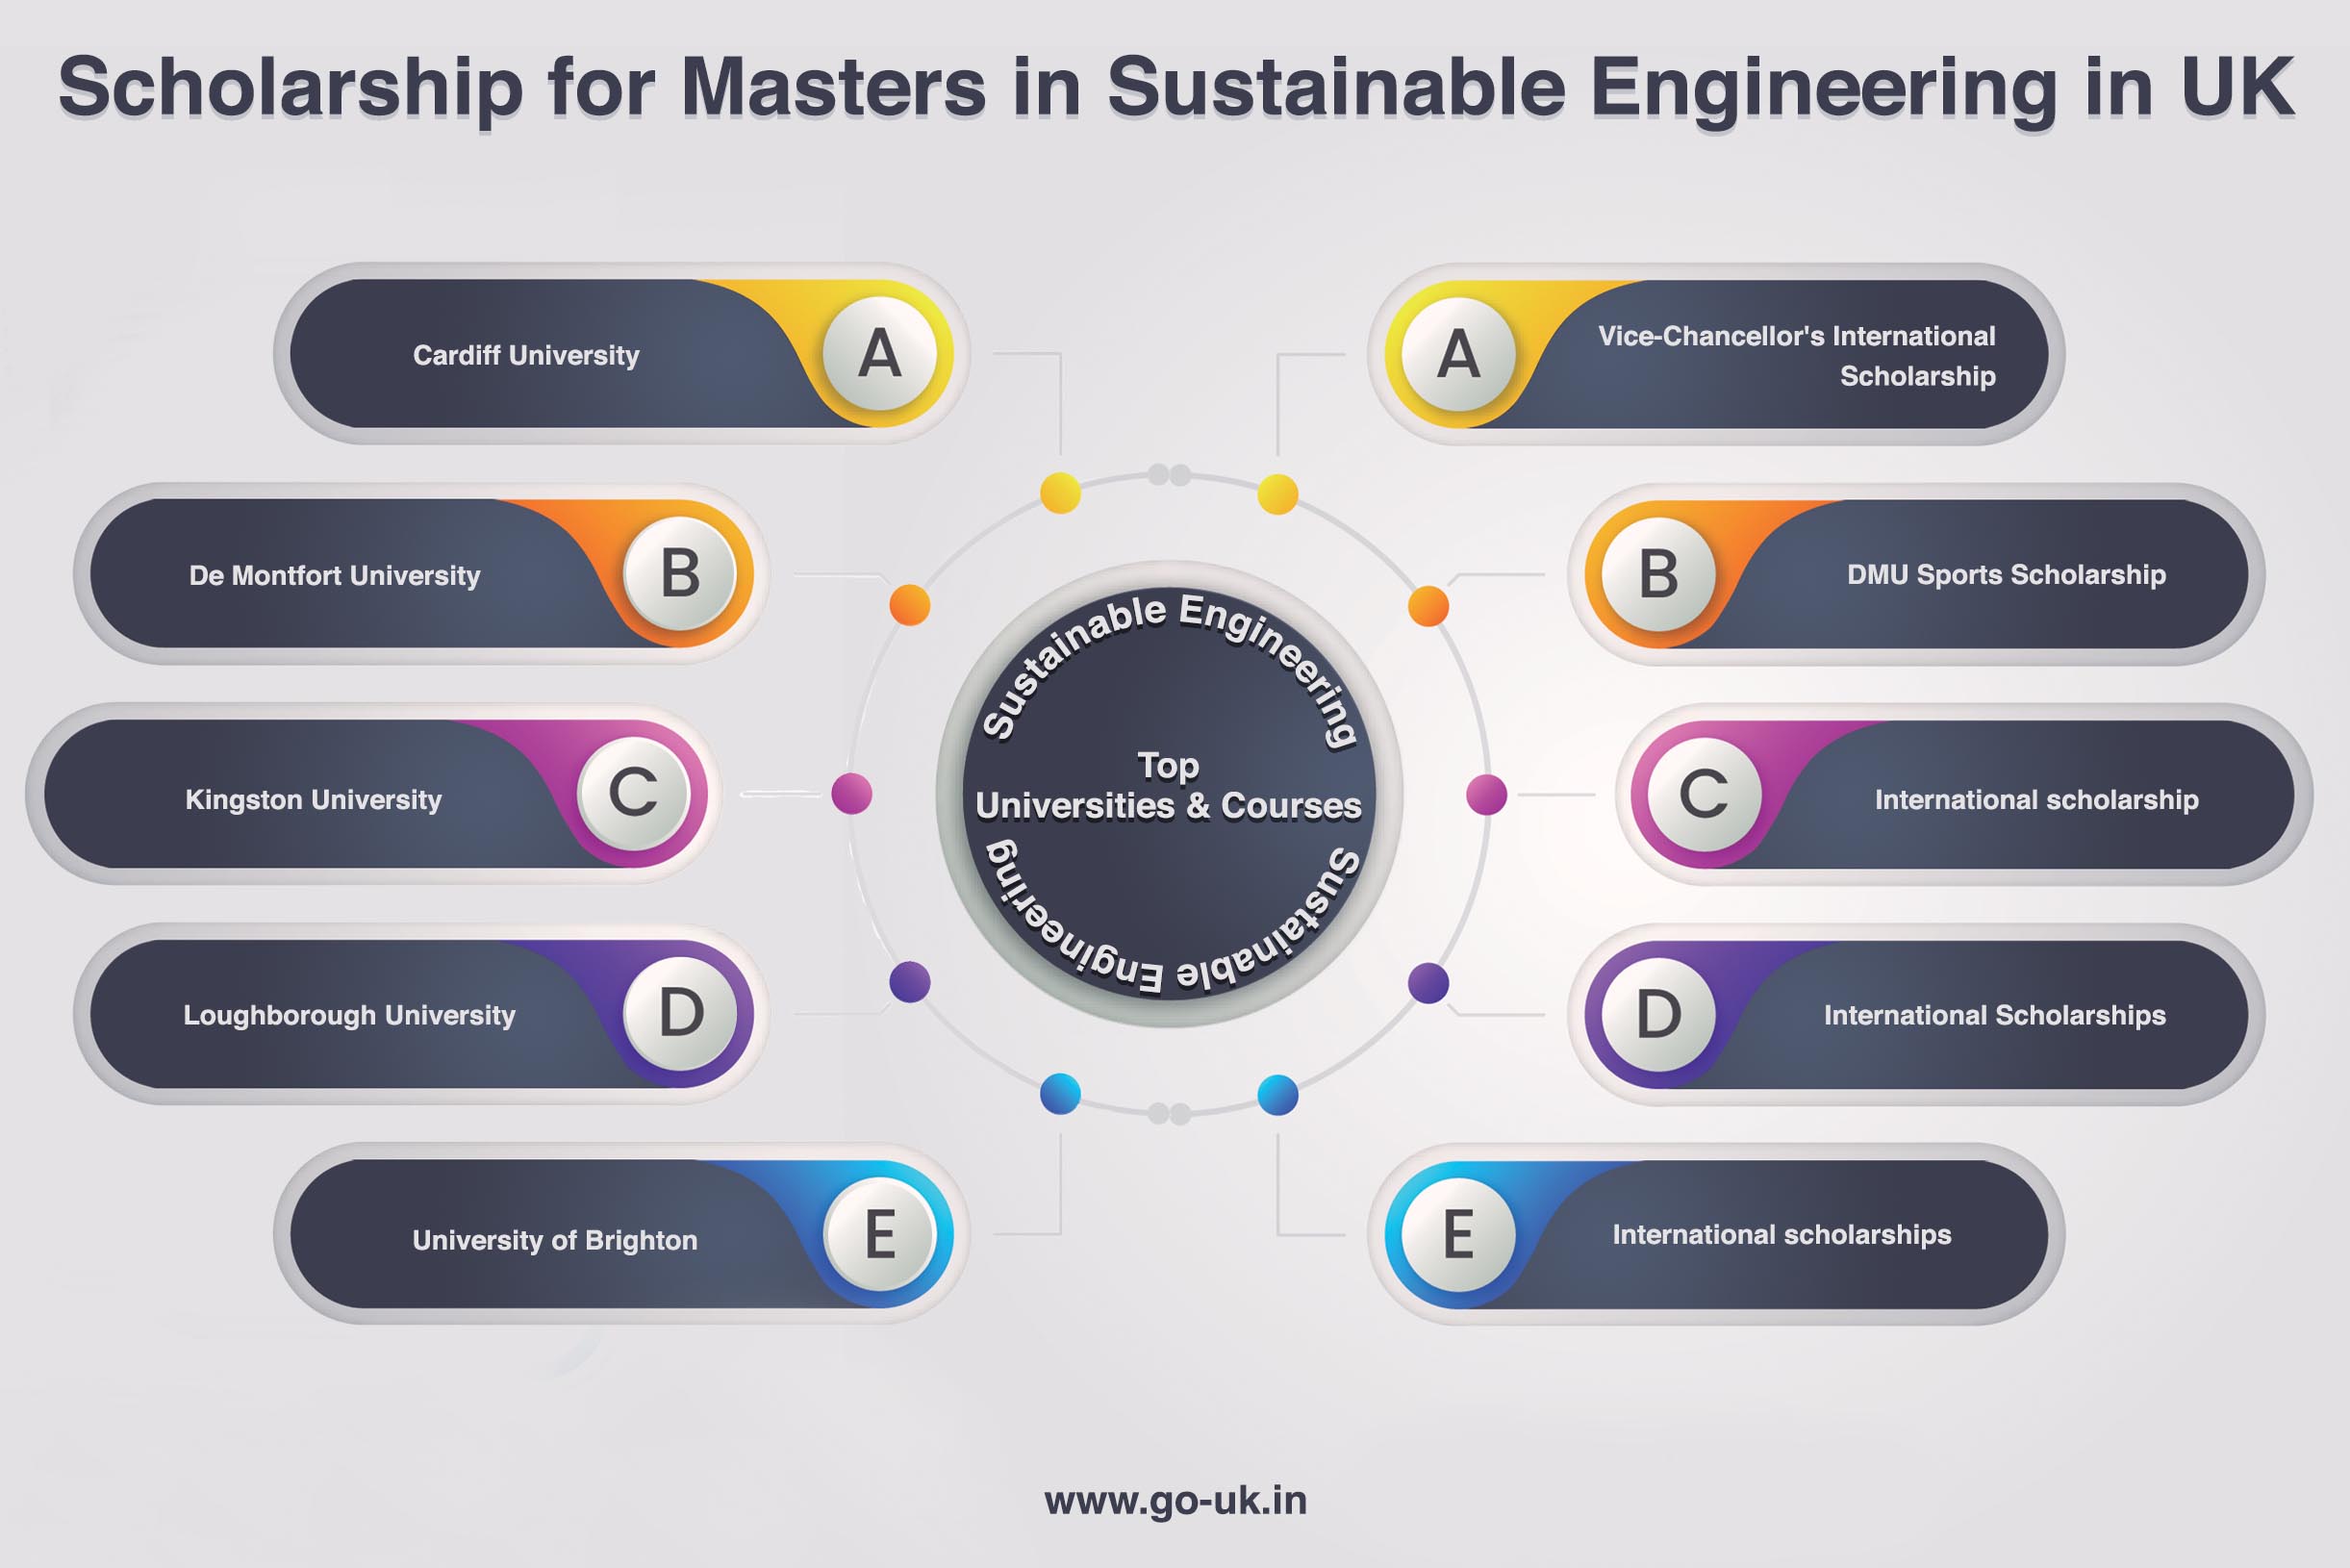 Scholarships for Masters in Sustainable Engineering in UK